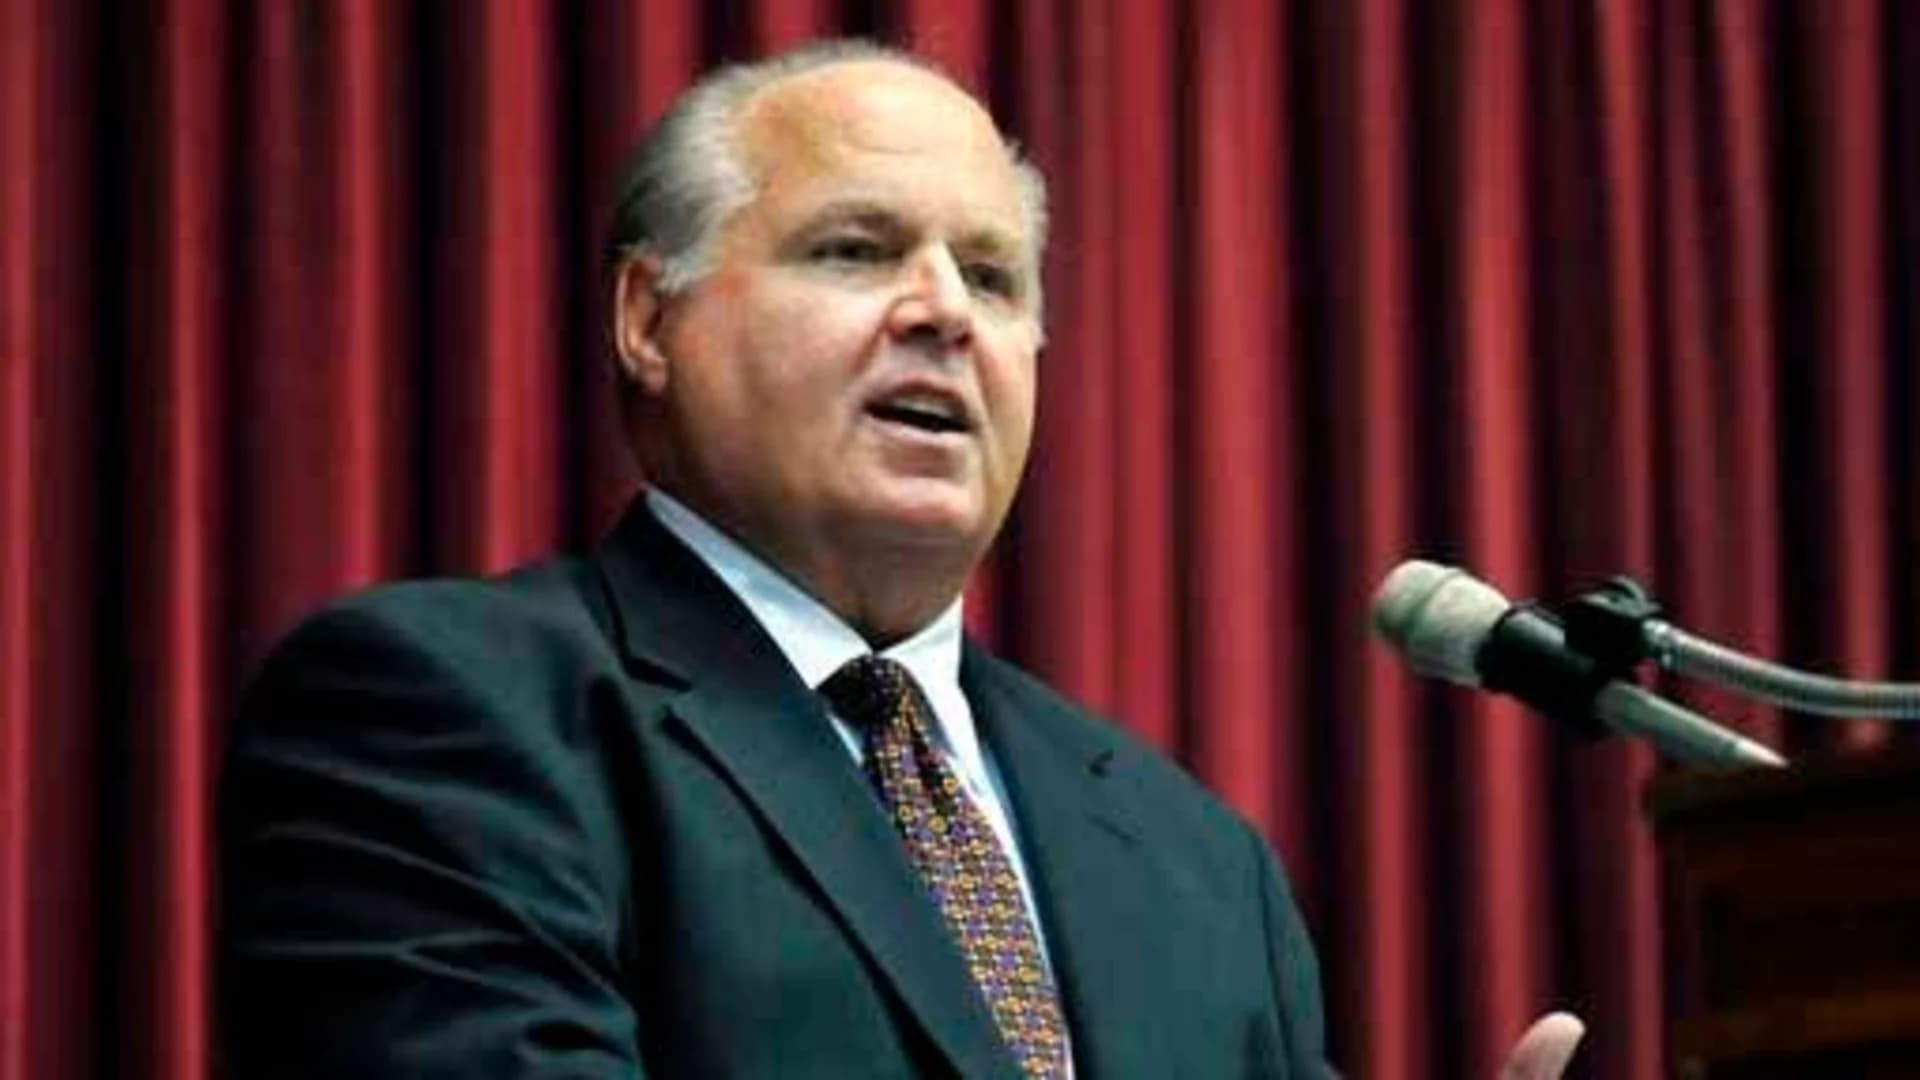 Rush Limbaugh says he's been diagnosed with lung cancer